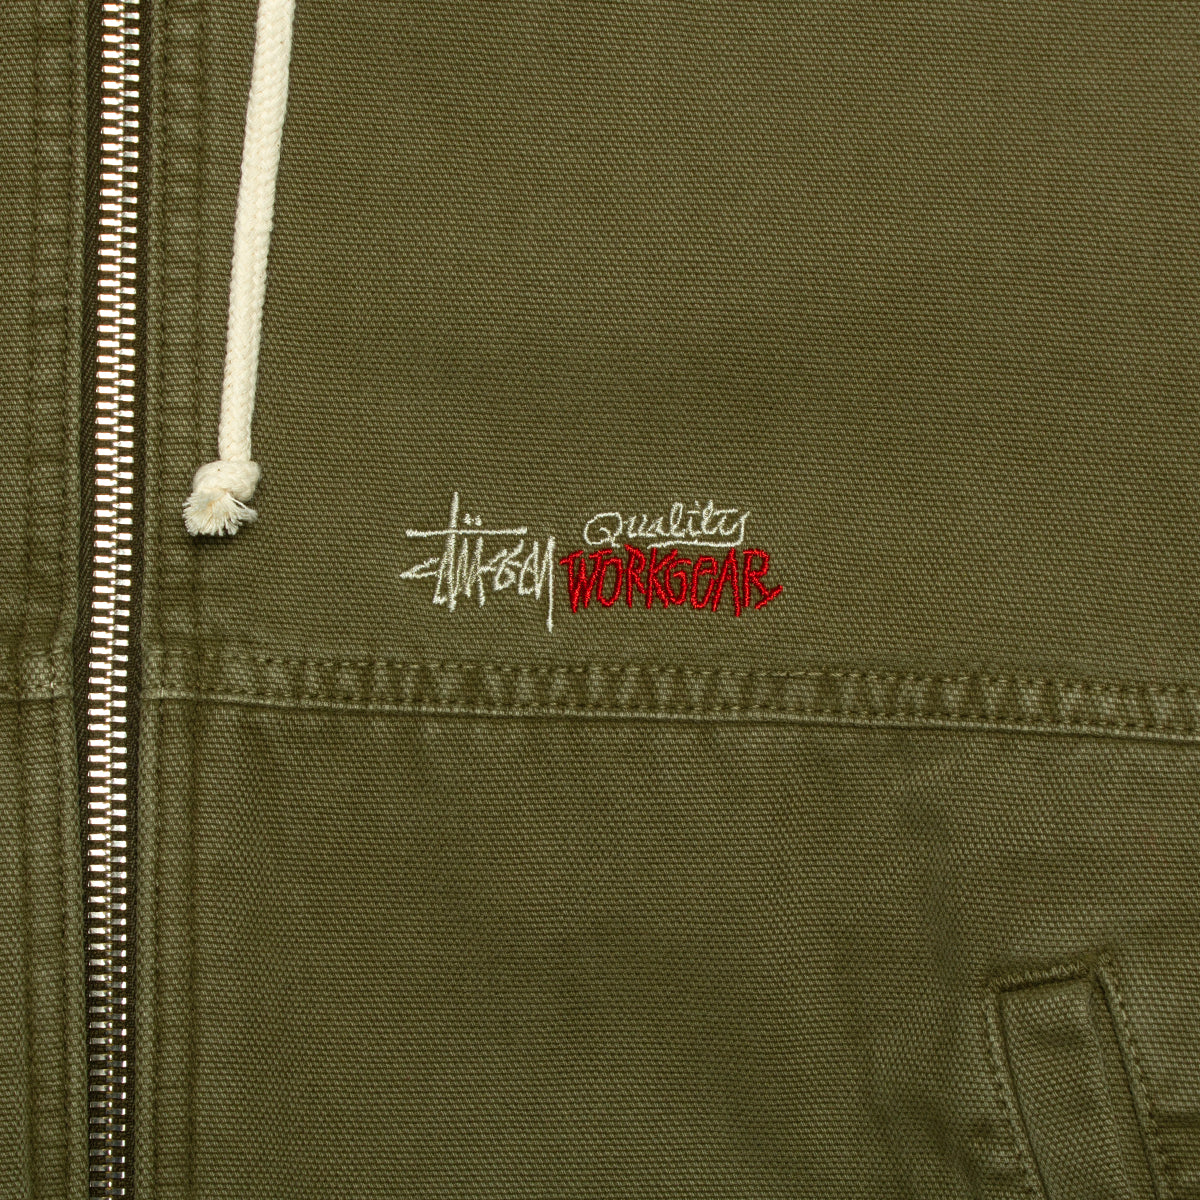 Stussy | Insulated Canvas Work Jacket Style # 115716 Color : Olive Drab